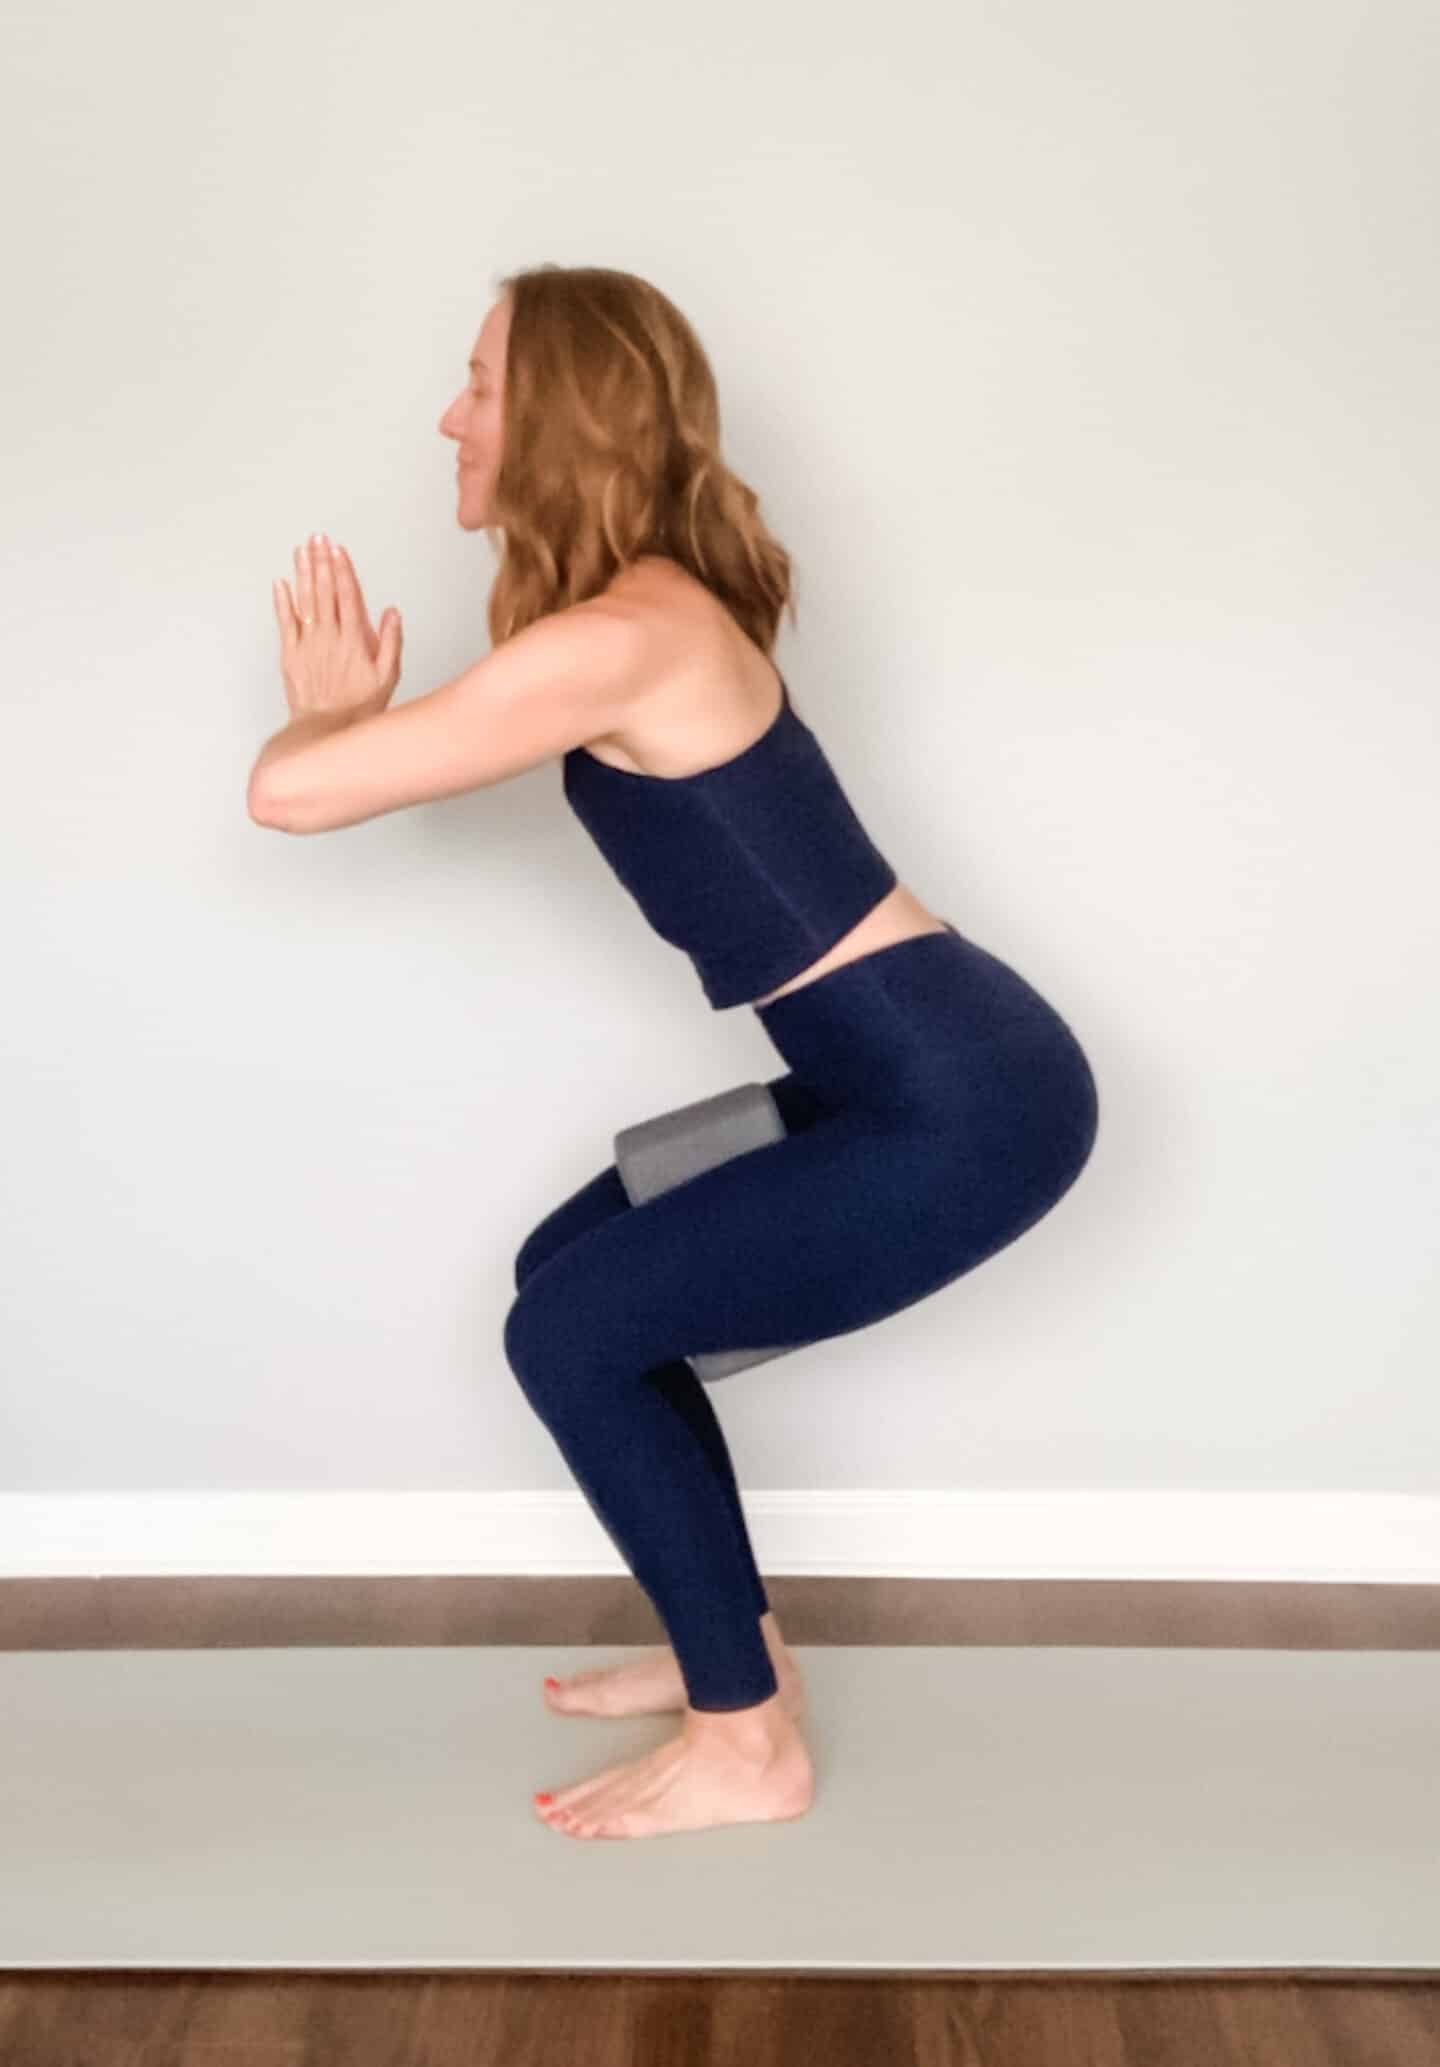 6 easy ways to add restorative yoga to your practice or teaching